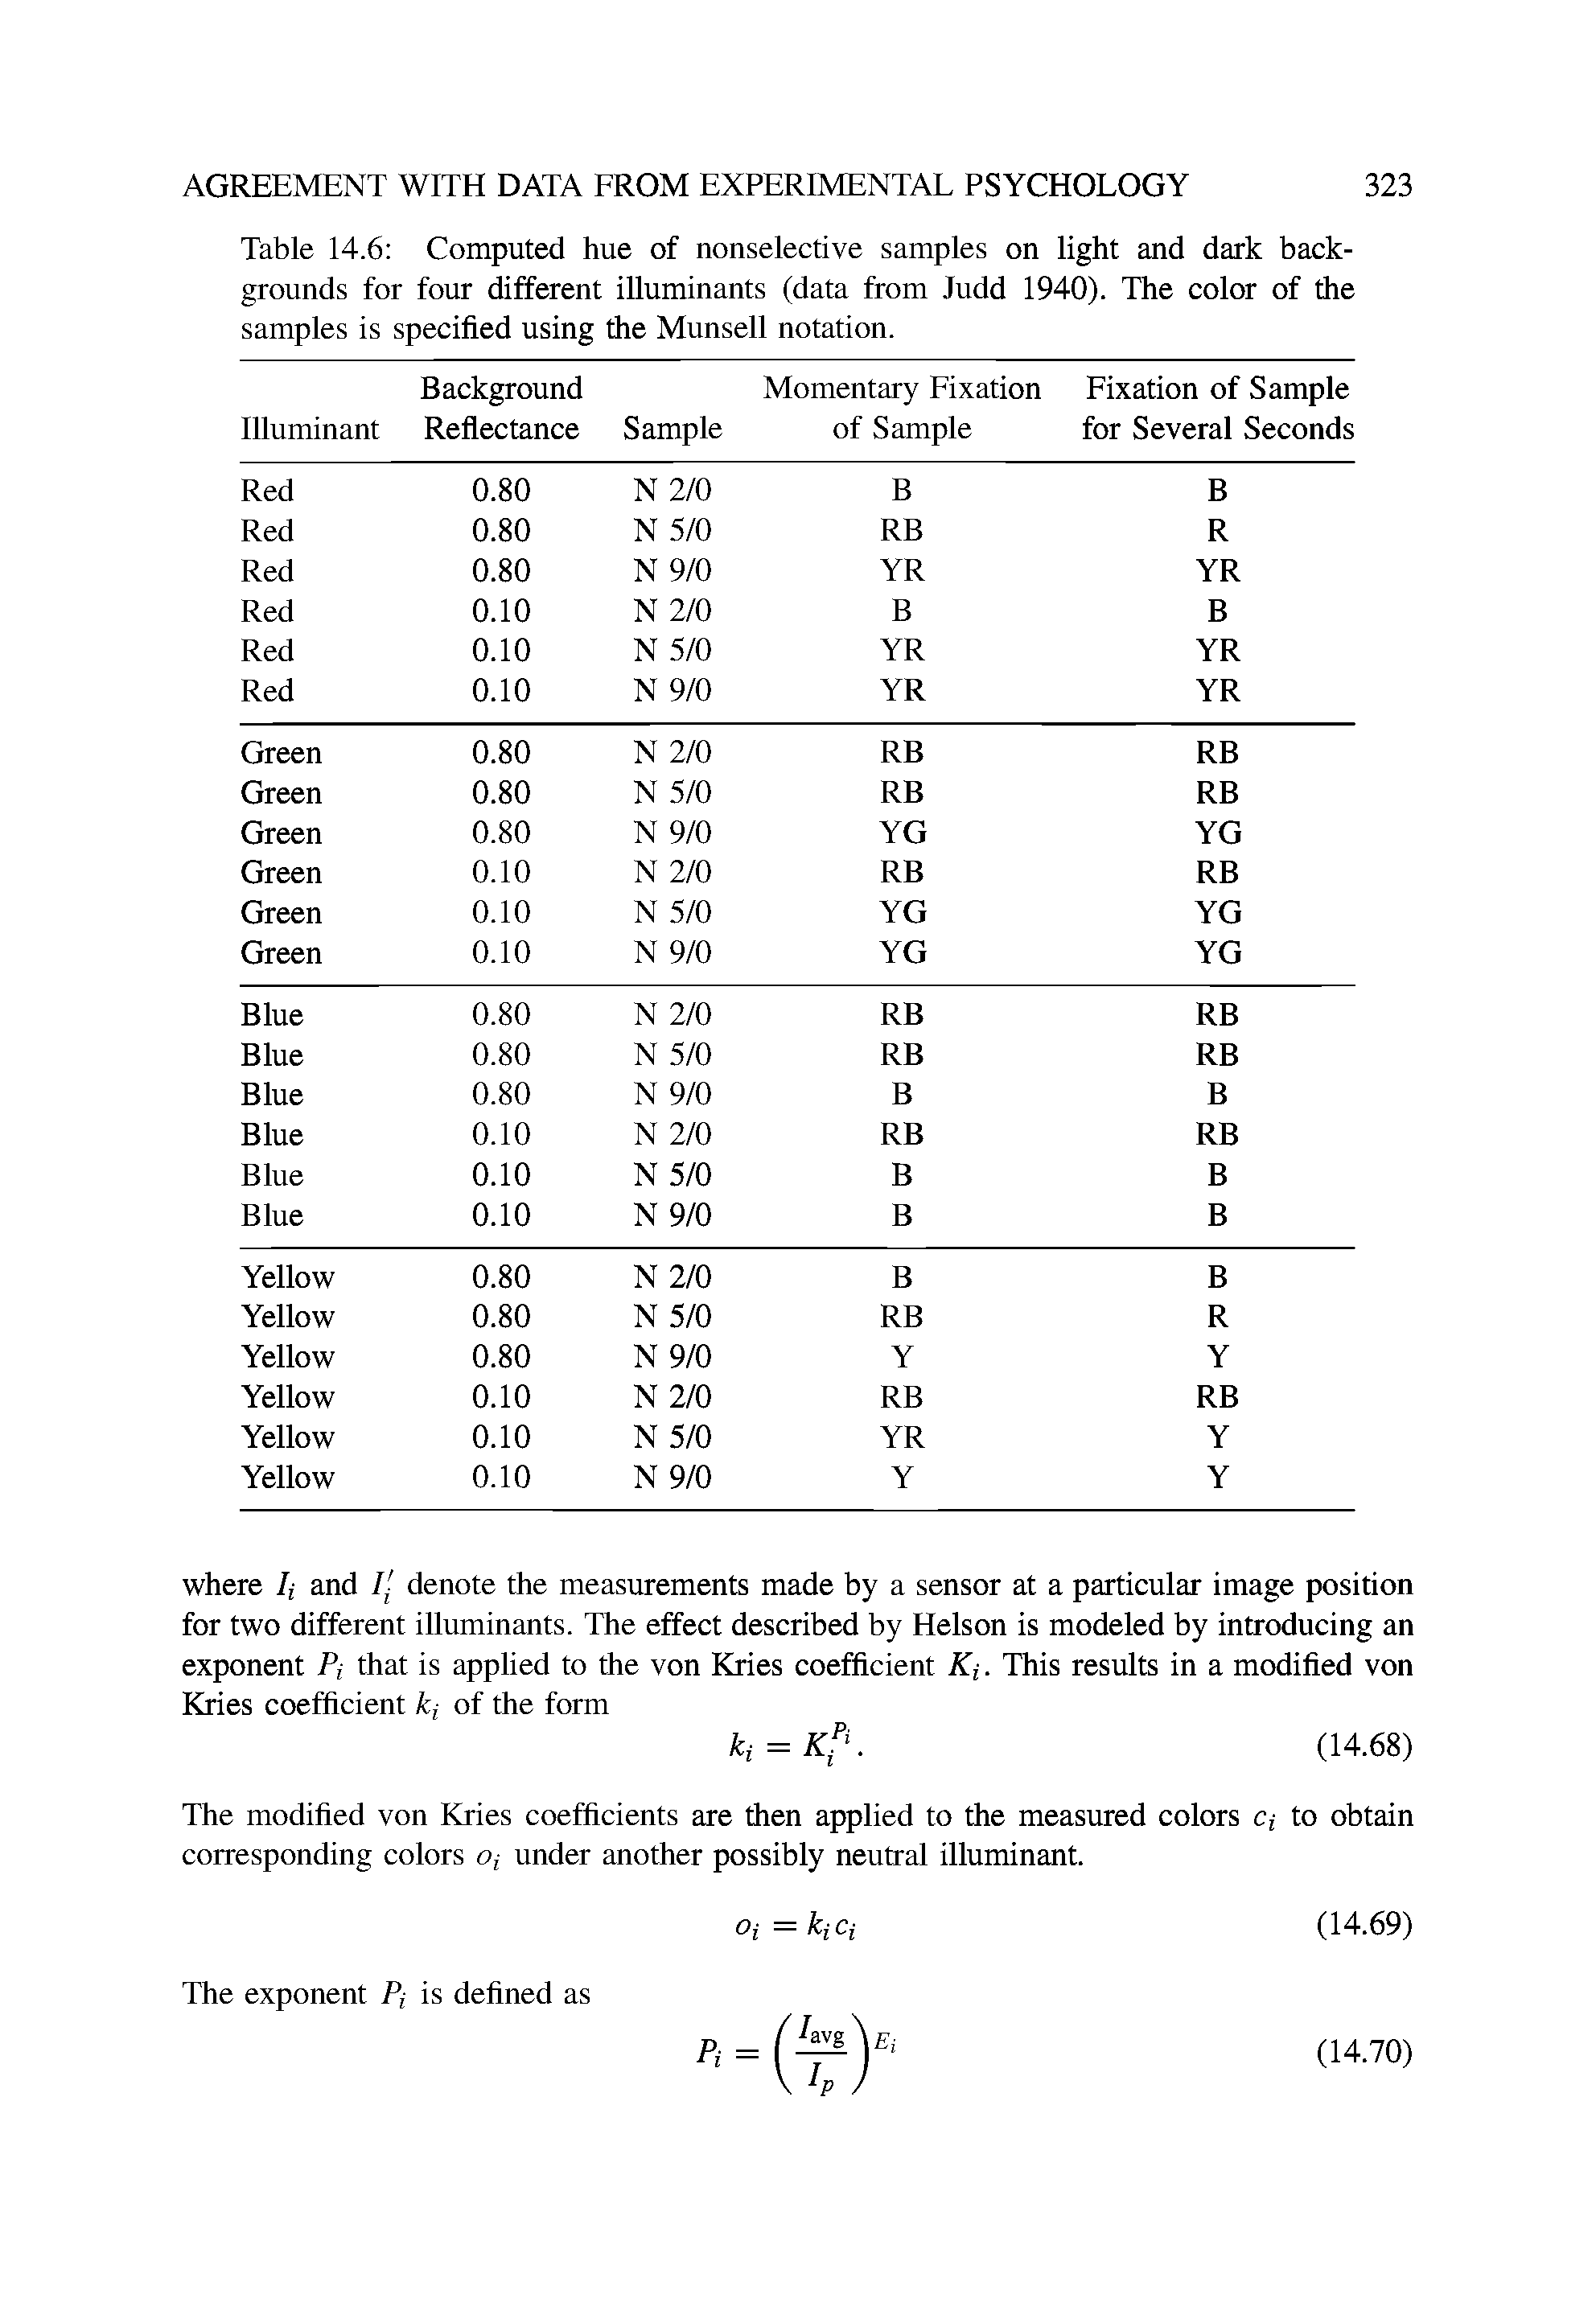 Table 14.6 Computed hue of nonselective samples on light and dark backgrounds for four different illuminants (data from Judd 1940). The color of the samples is specified using the Munsell notation.